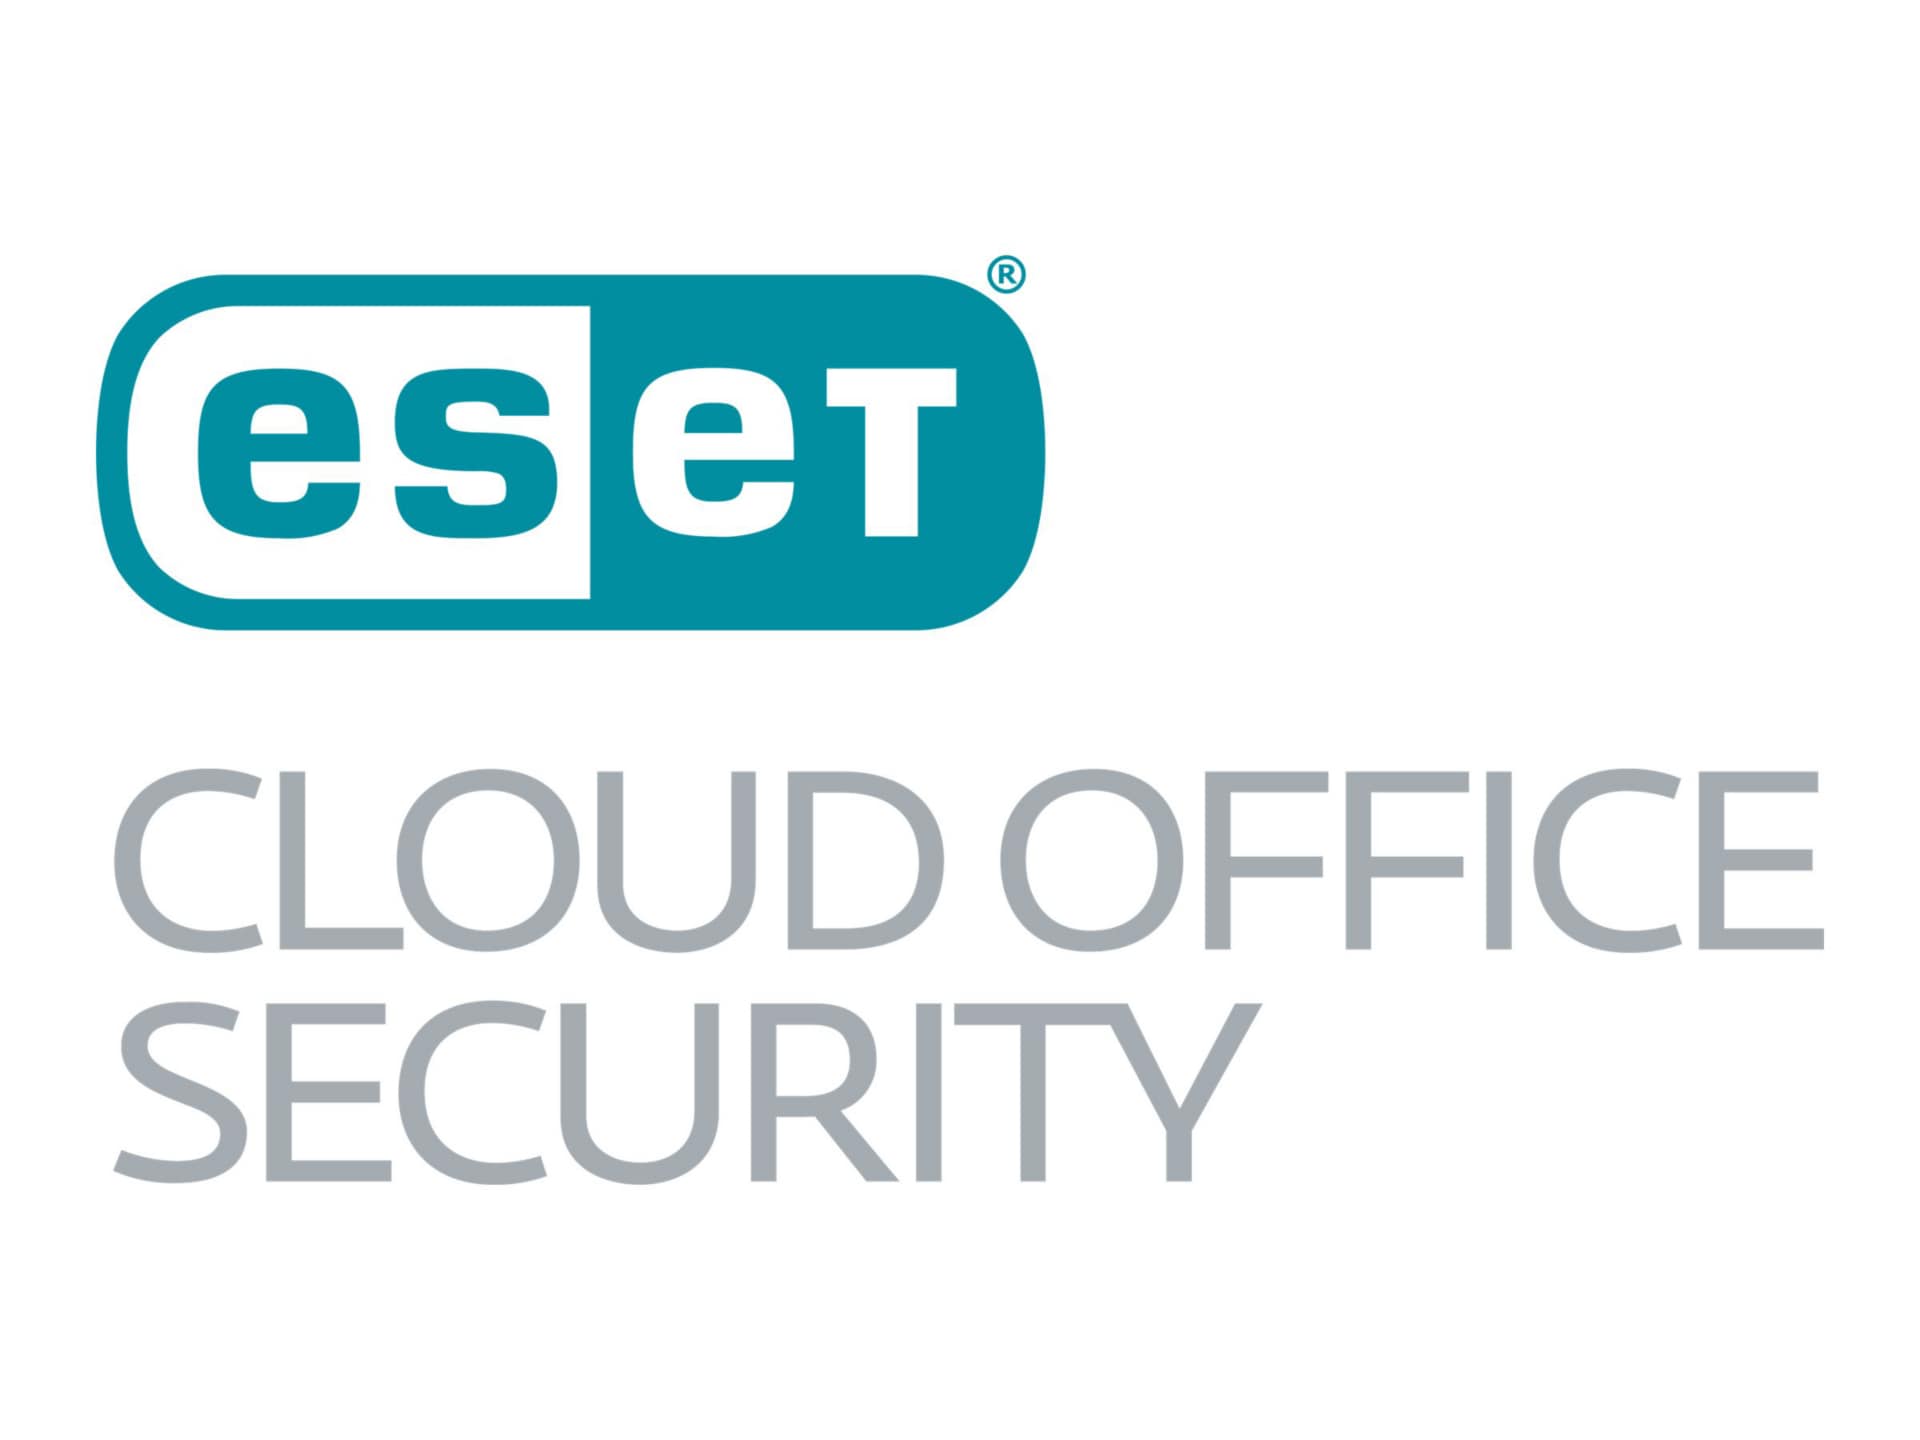 ESET Cloud Office Security - subscription license (3 years) - 1 seat